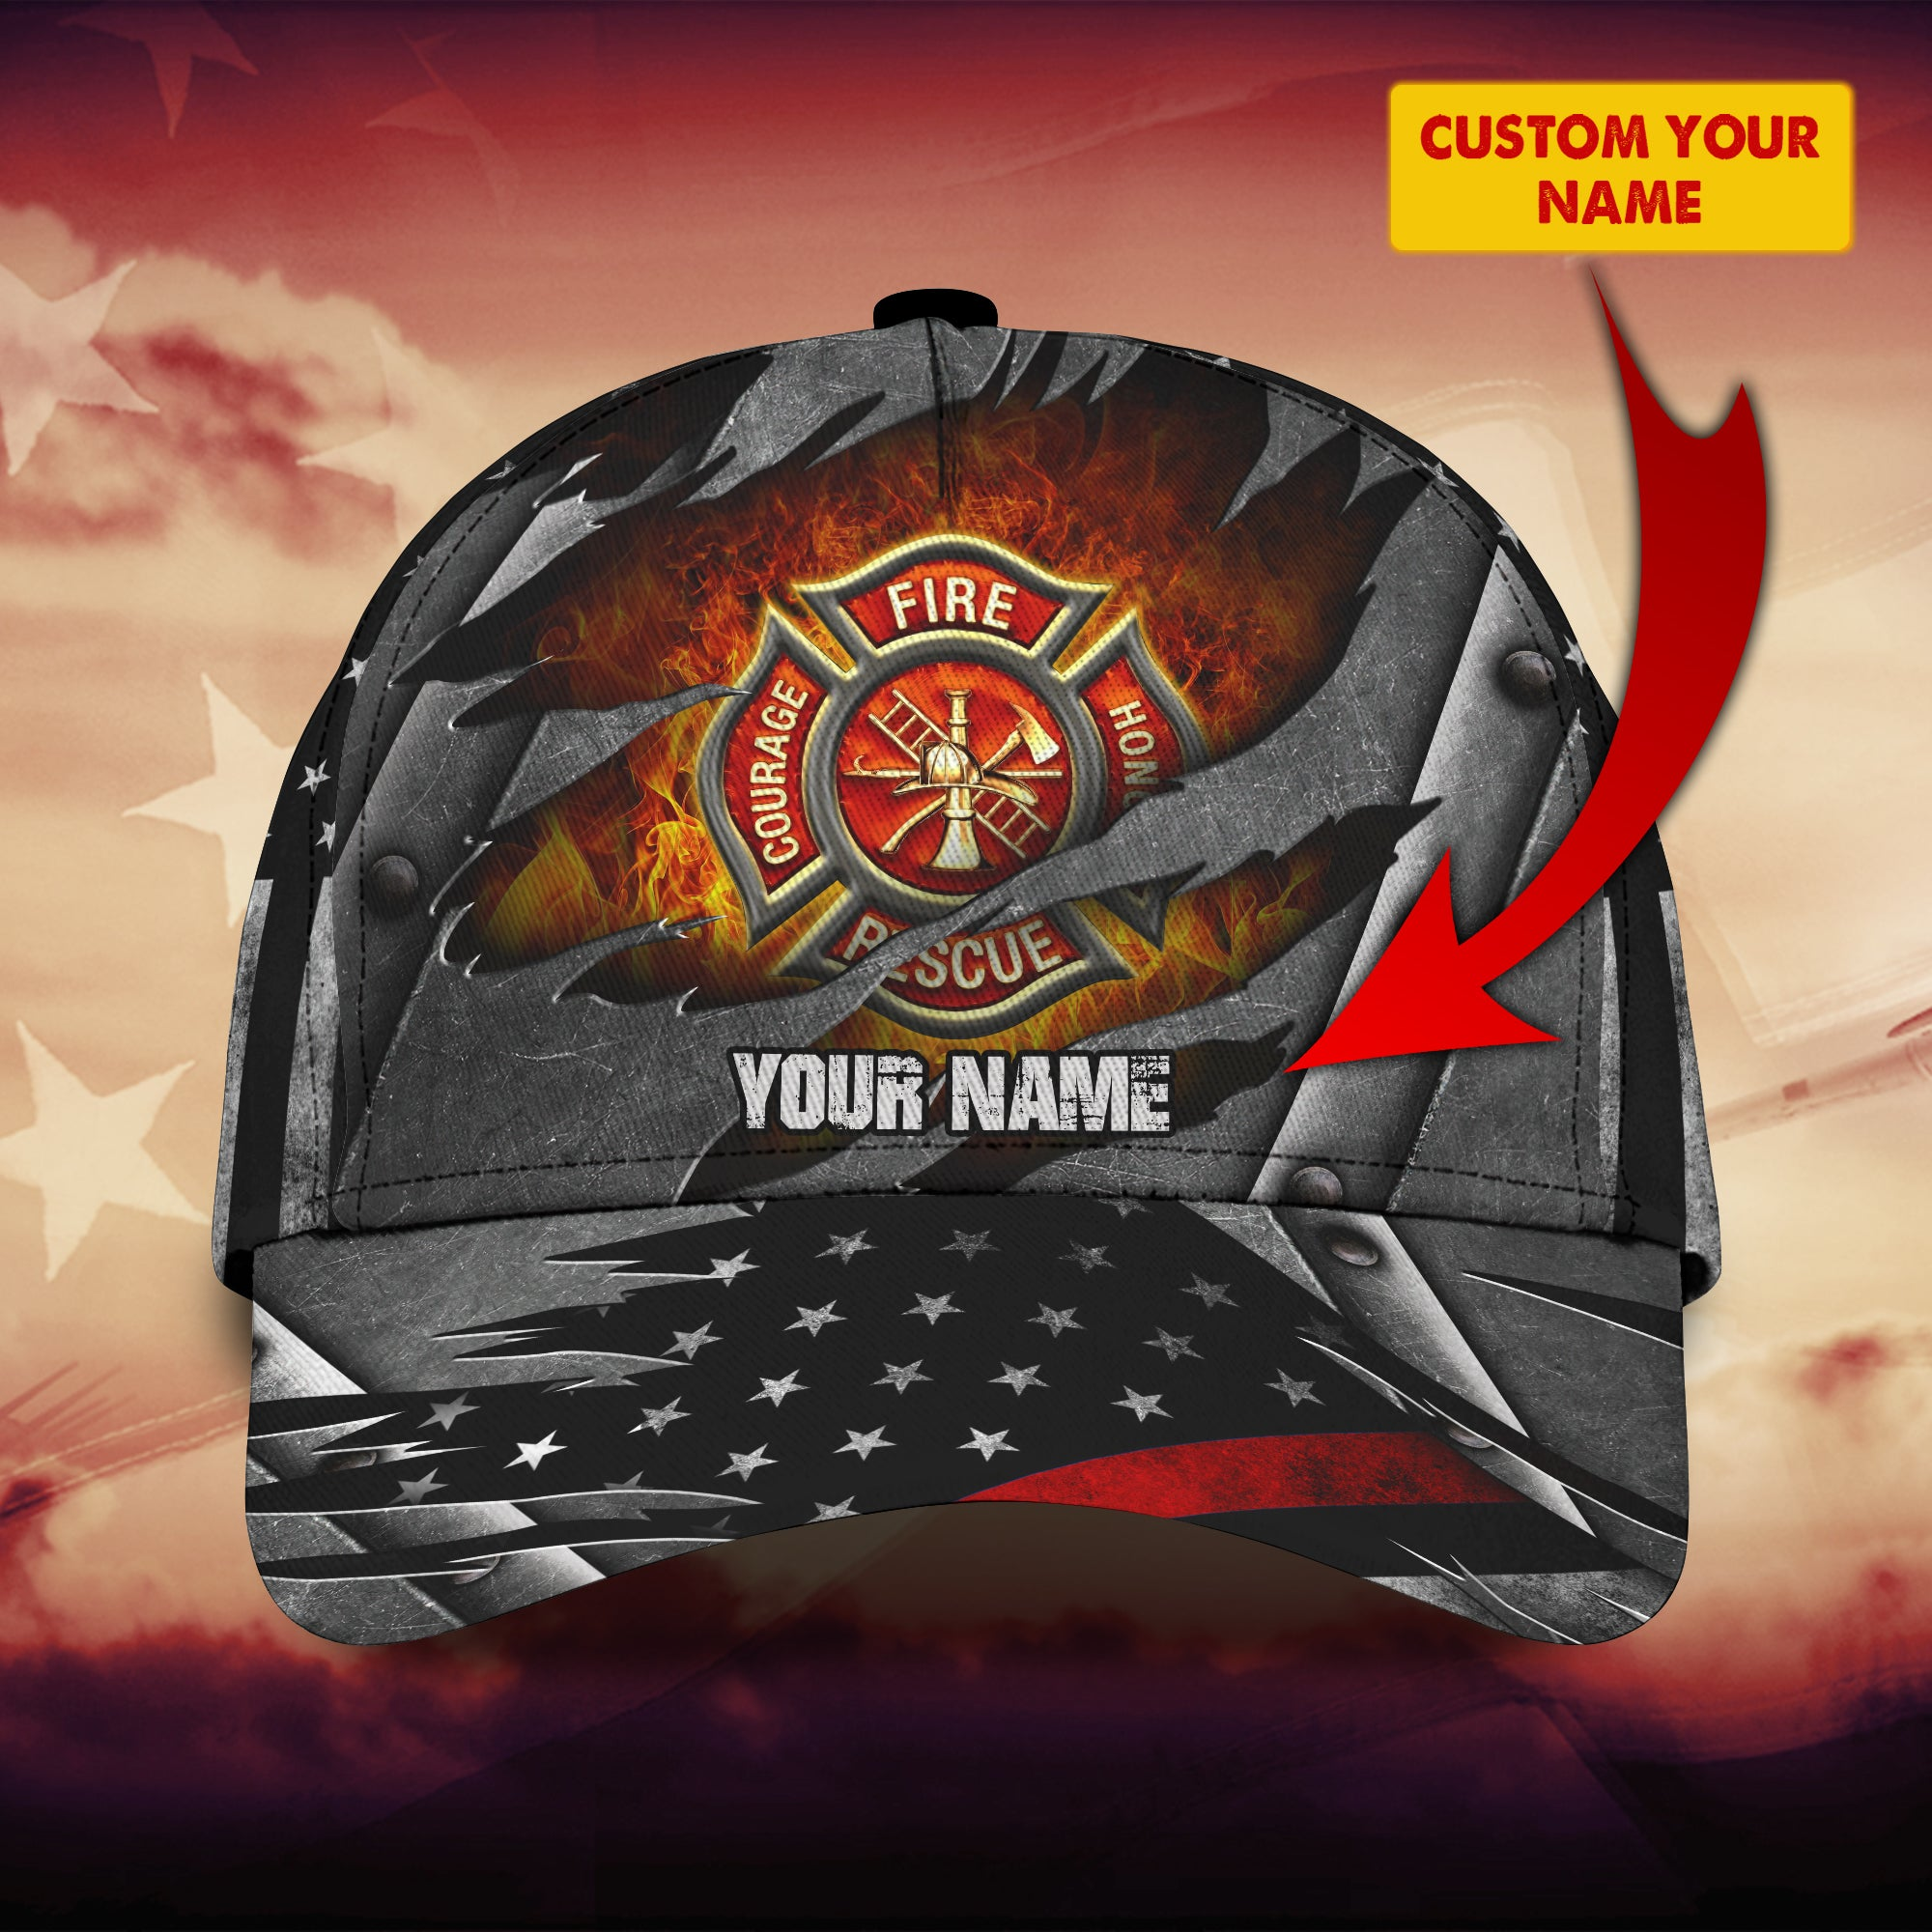 Personalized Name Black Cap For Firefighter